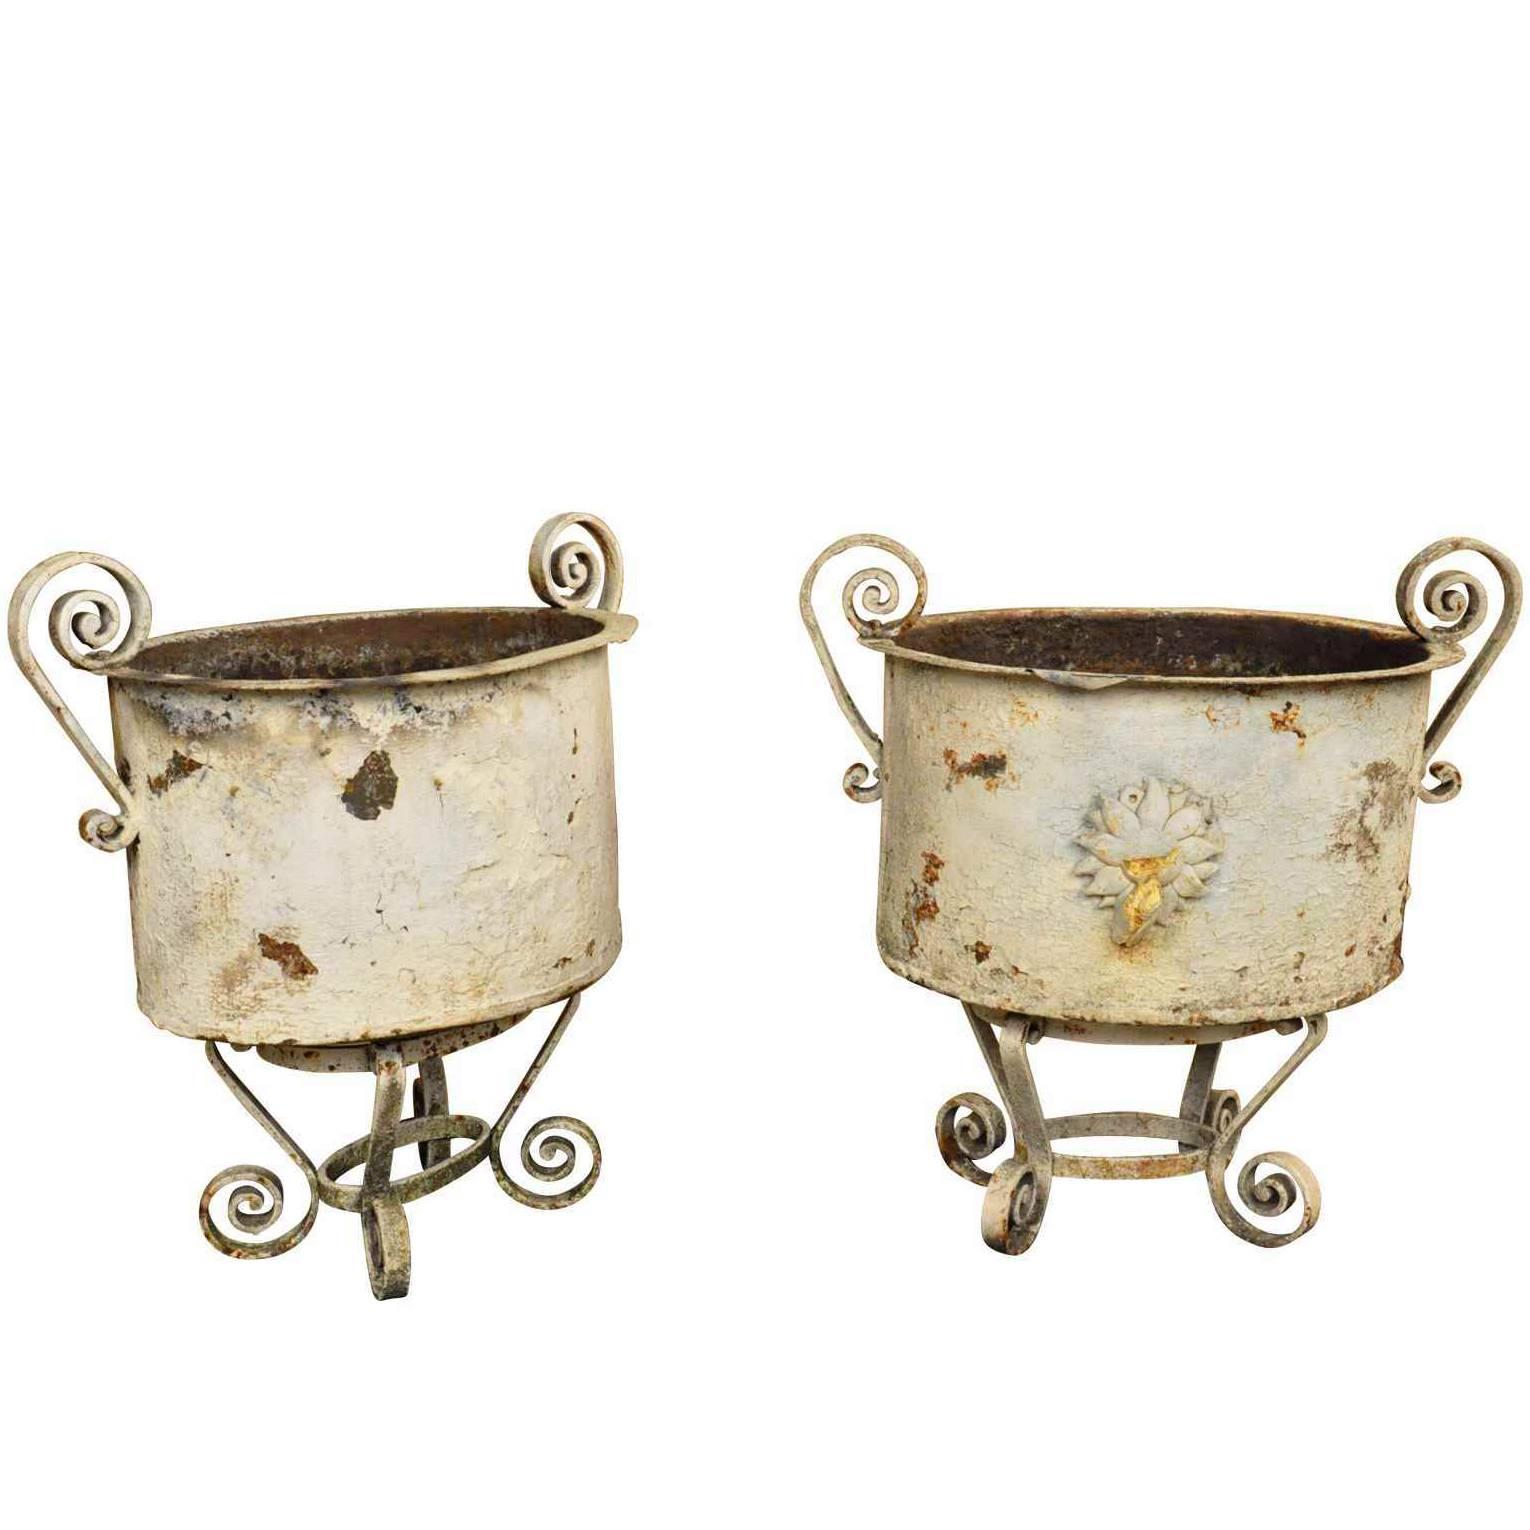 Pair of 19th Century Jardinières from the South of France